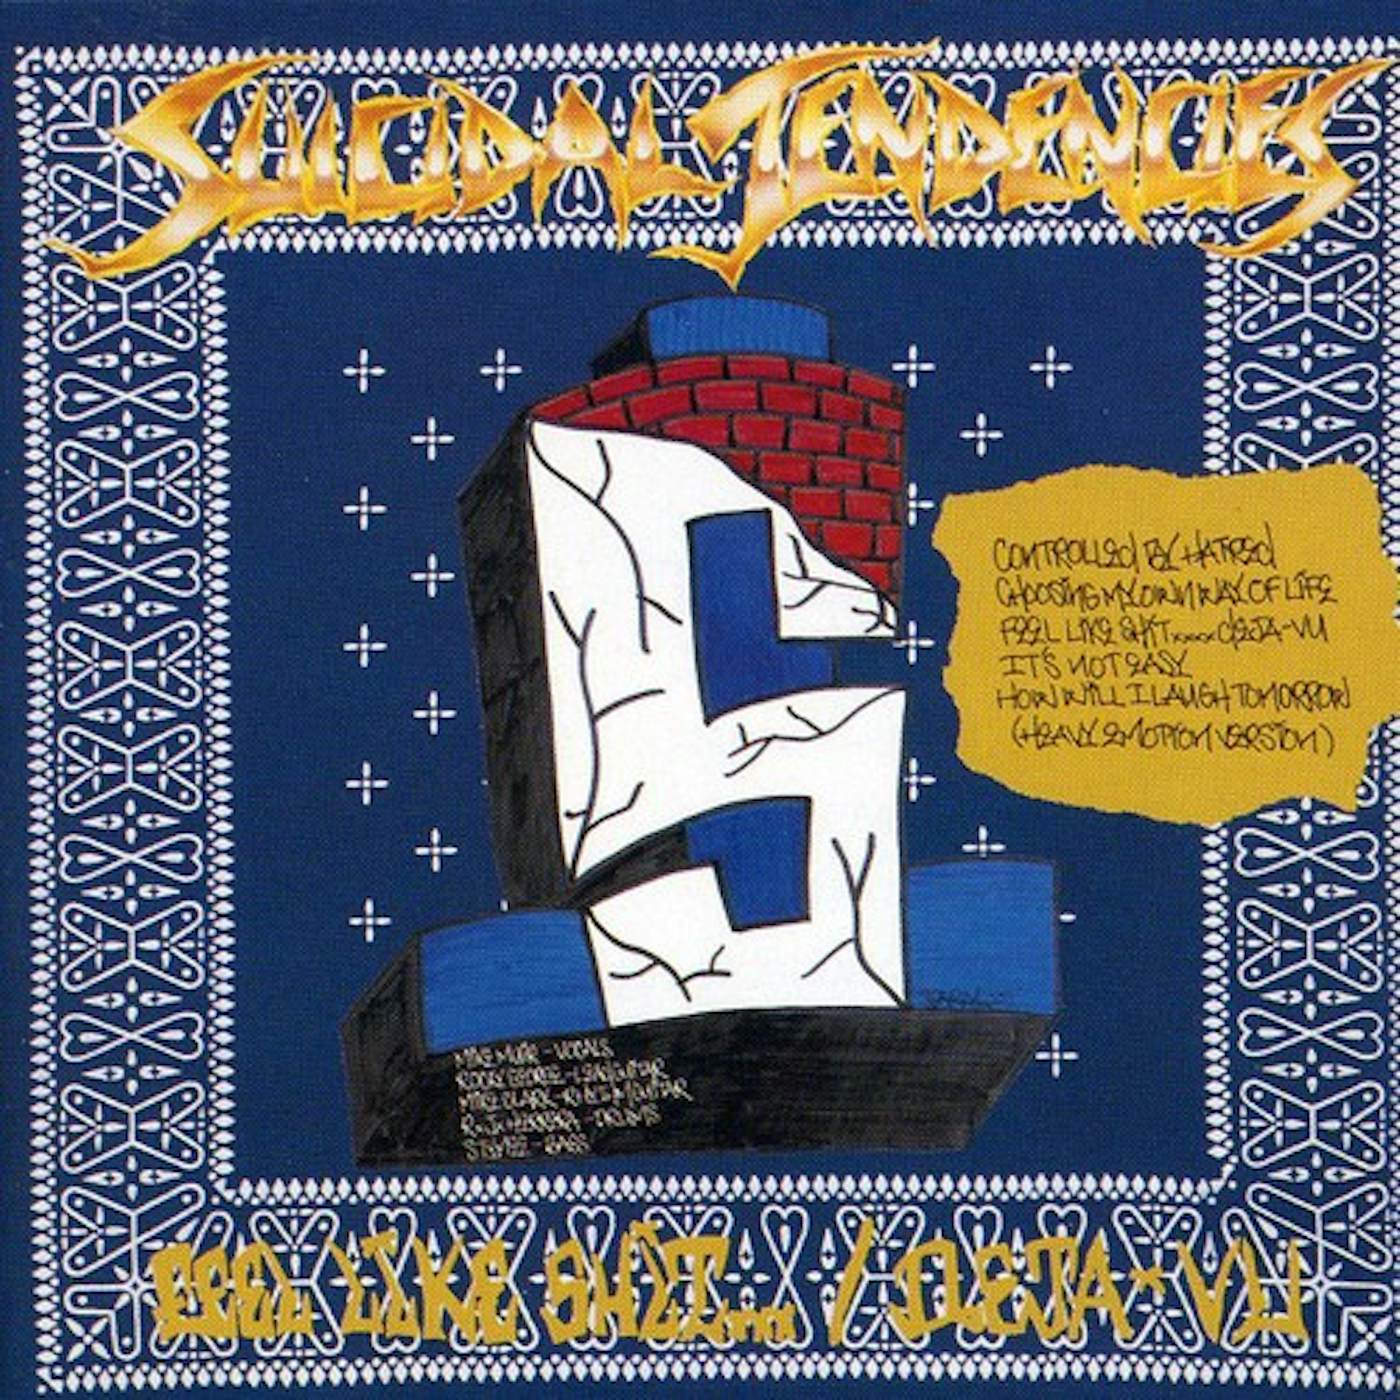 Suicidal Tendencies CONTROLLED BY HATRED / FEEL LIKE SHIT CD